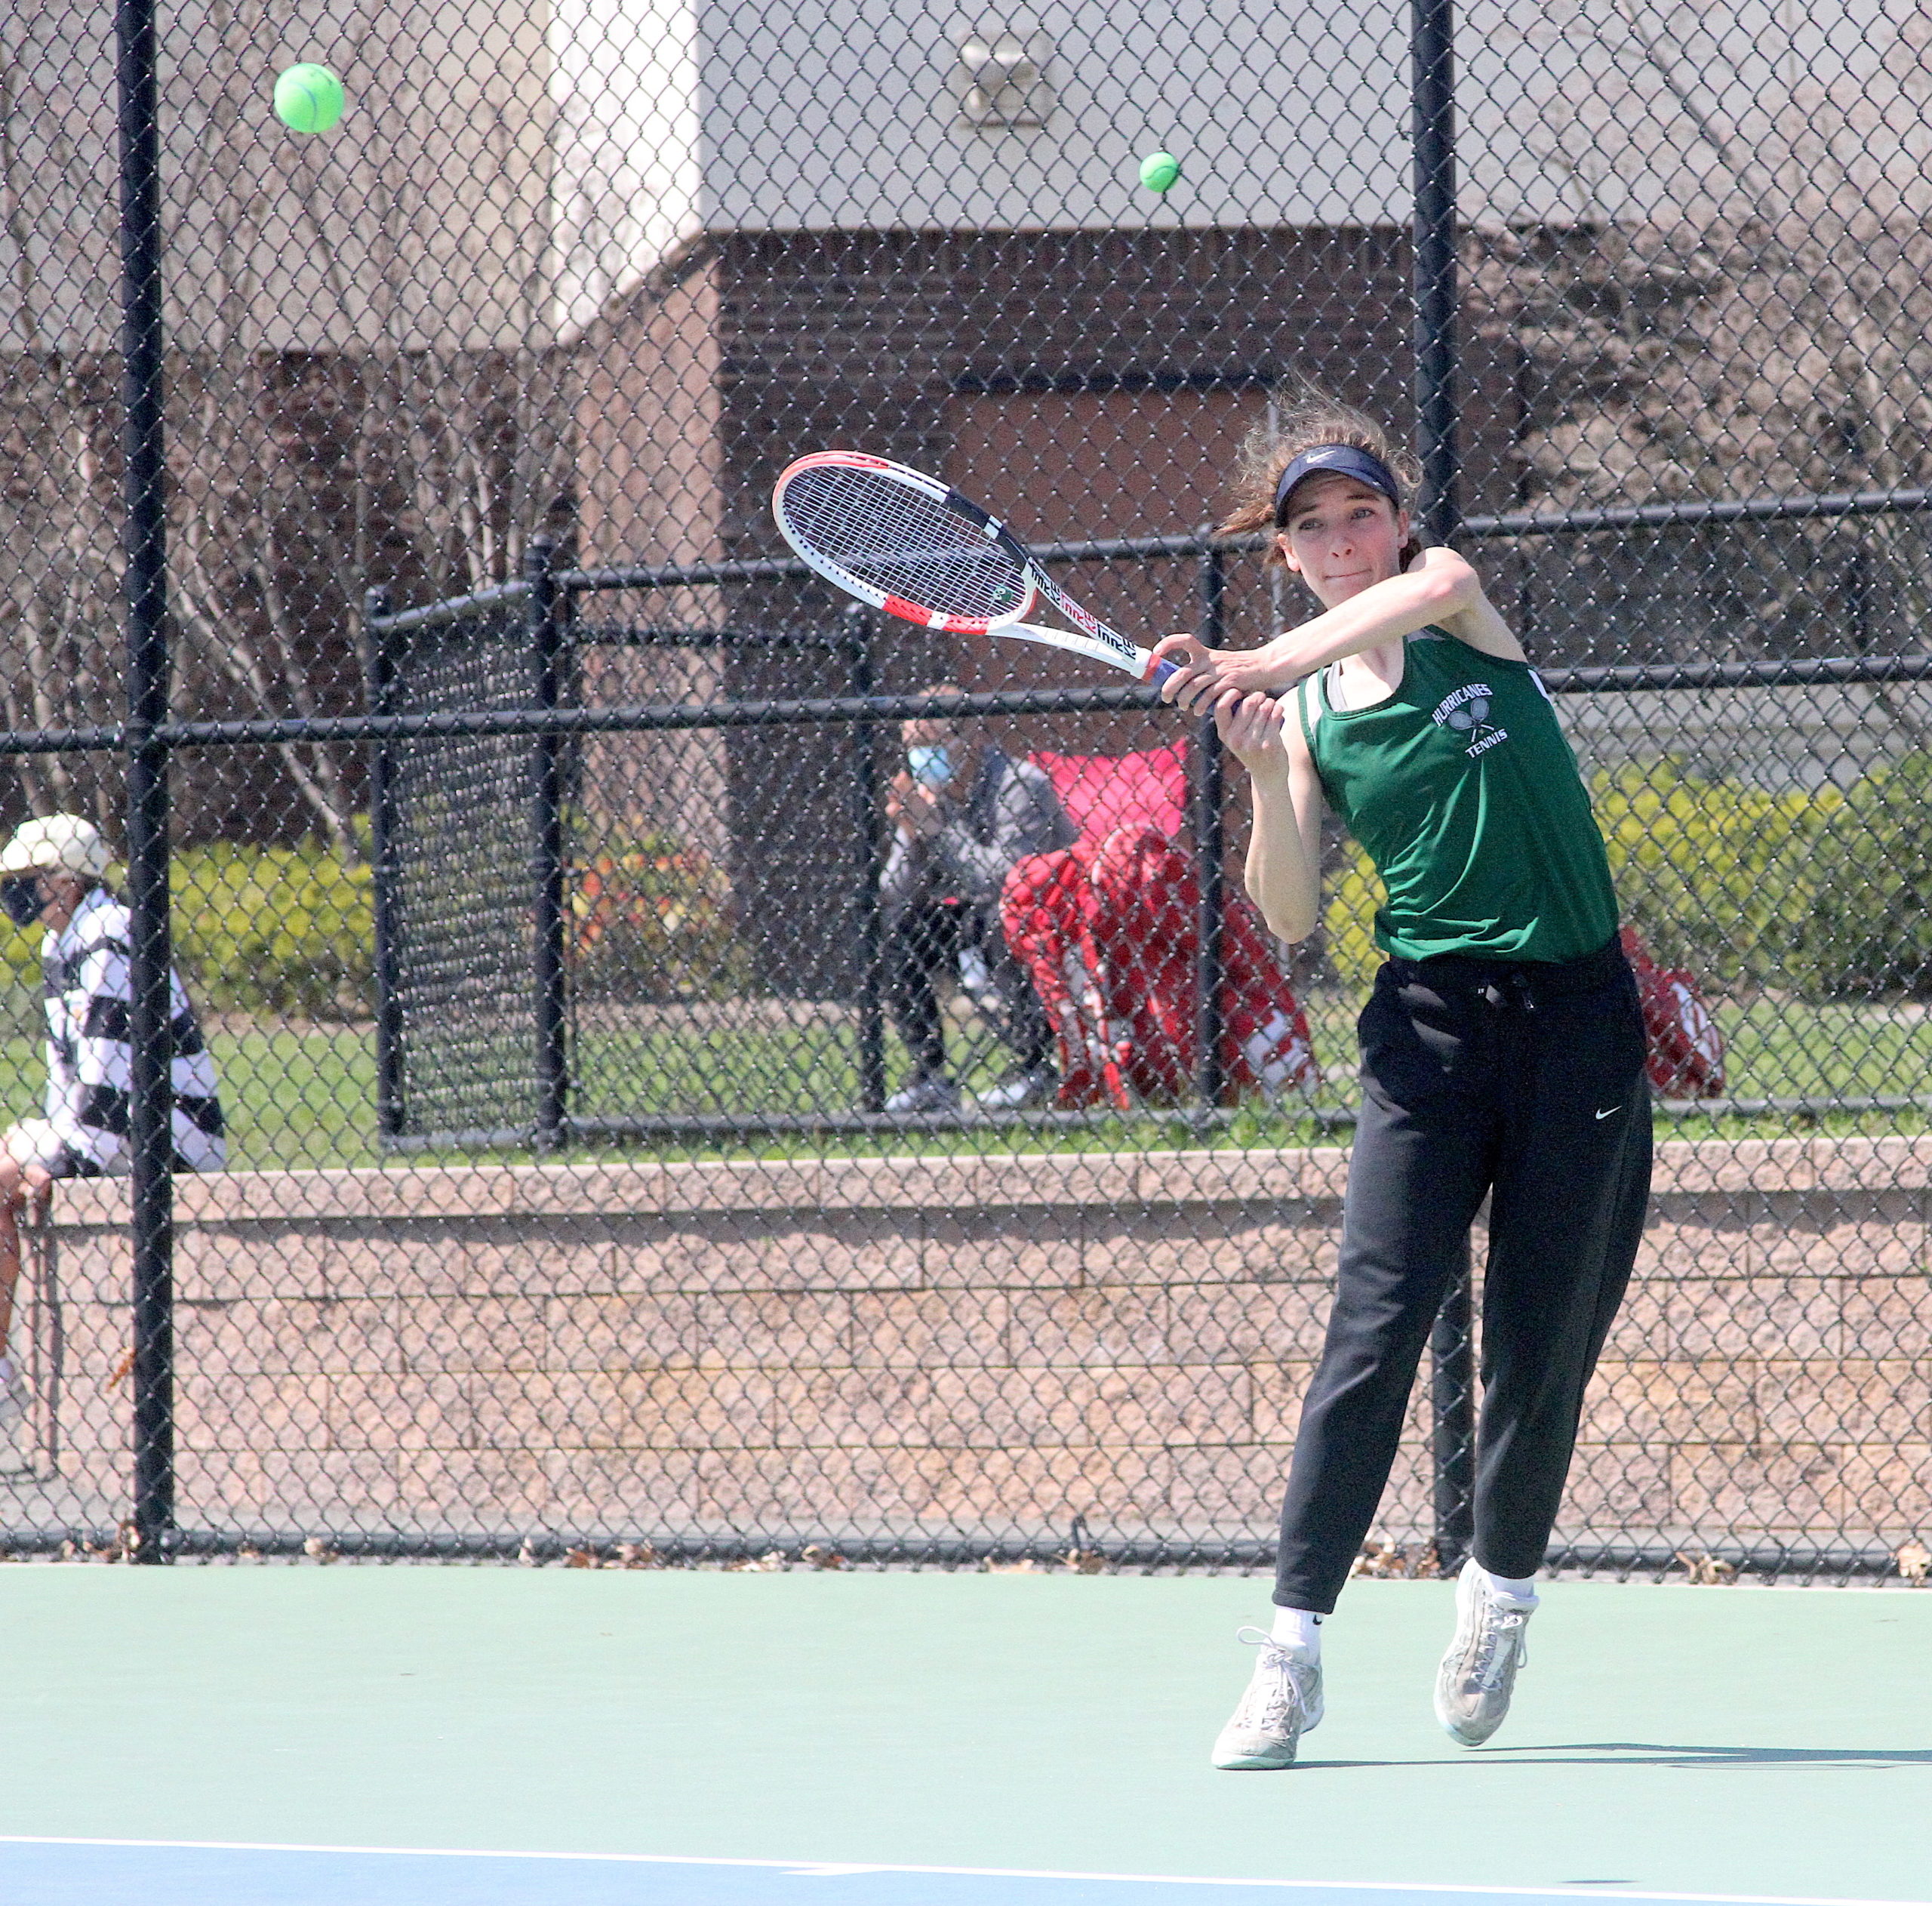 Westhampton Beach rising senior Rose Hayes keeps a volley going.